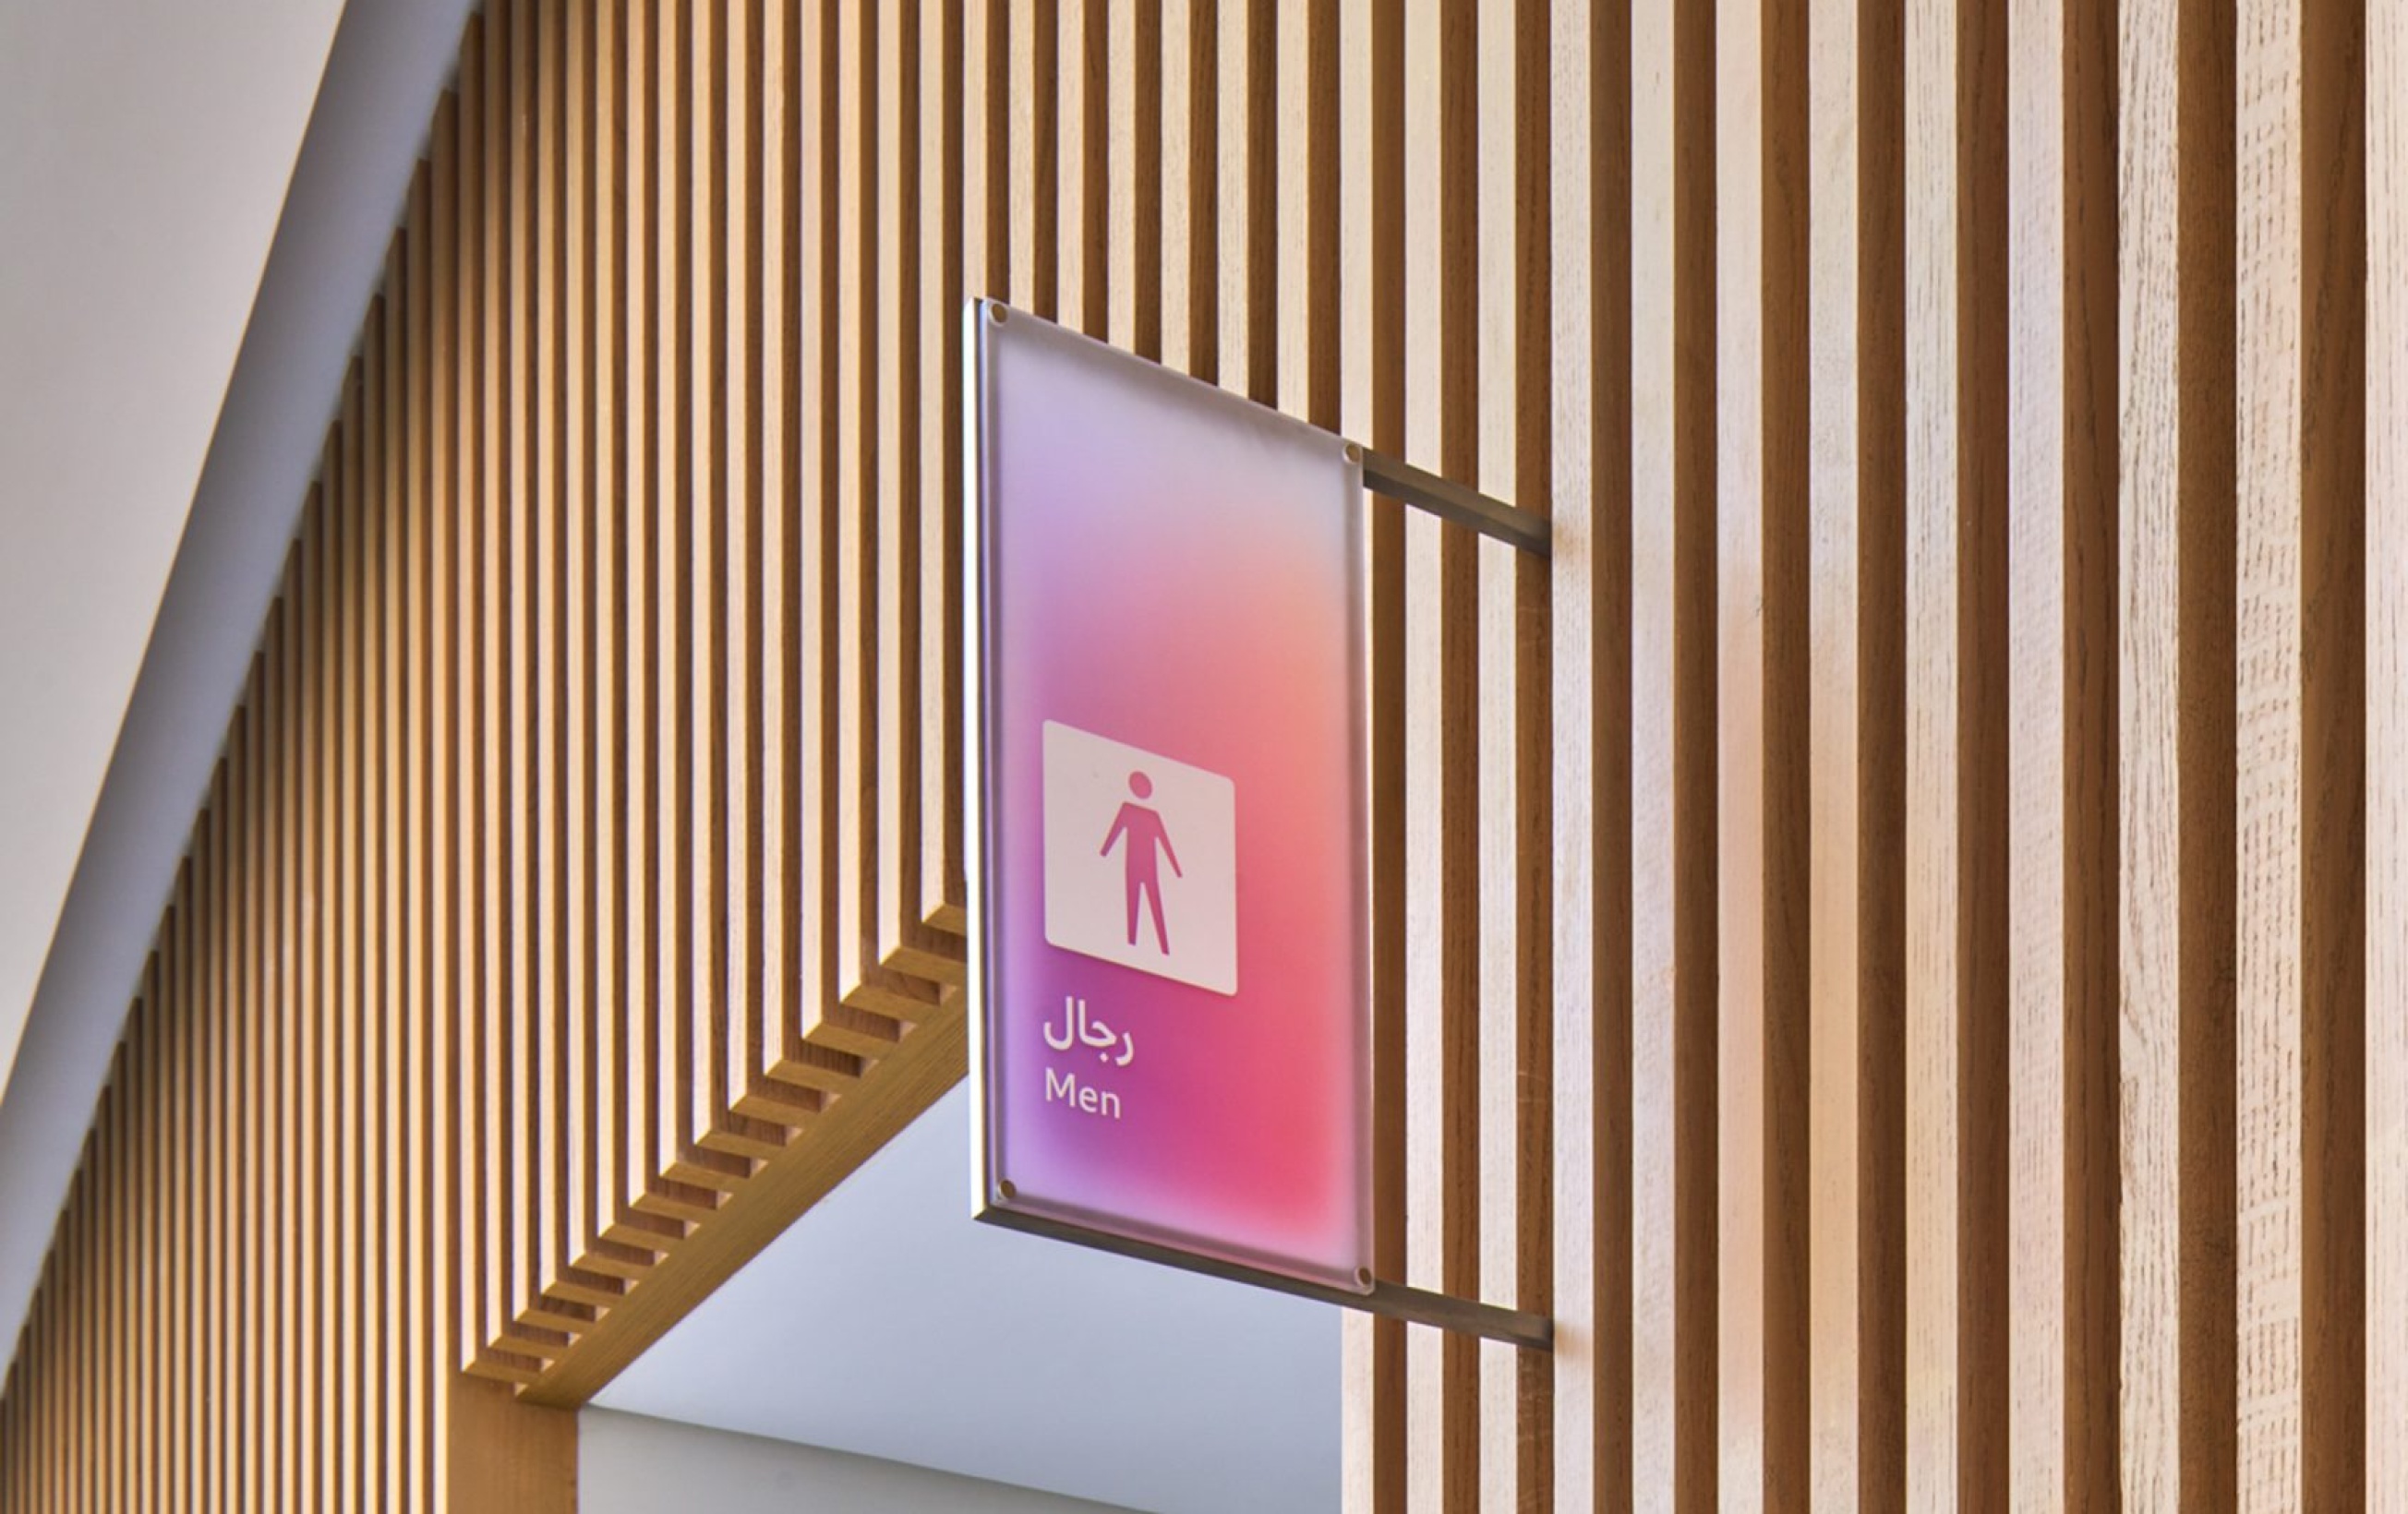 A photograph taken from a worm's-eye view of a wooden slatted wall with an opening that serves as a door. A pink and purple colored wayfinding sign is mounted between two slats to identify the male toilet. The sign is made of a milky, half-transparent material and is mounted on a brushed aluminum frame.